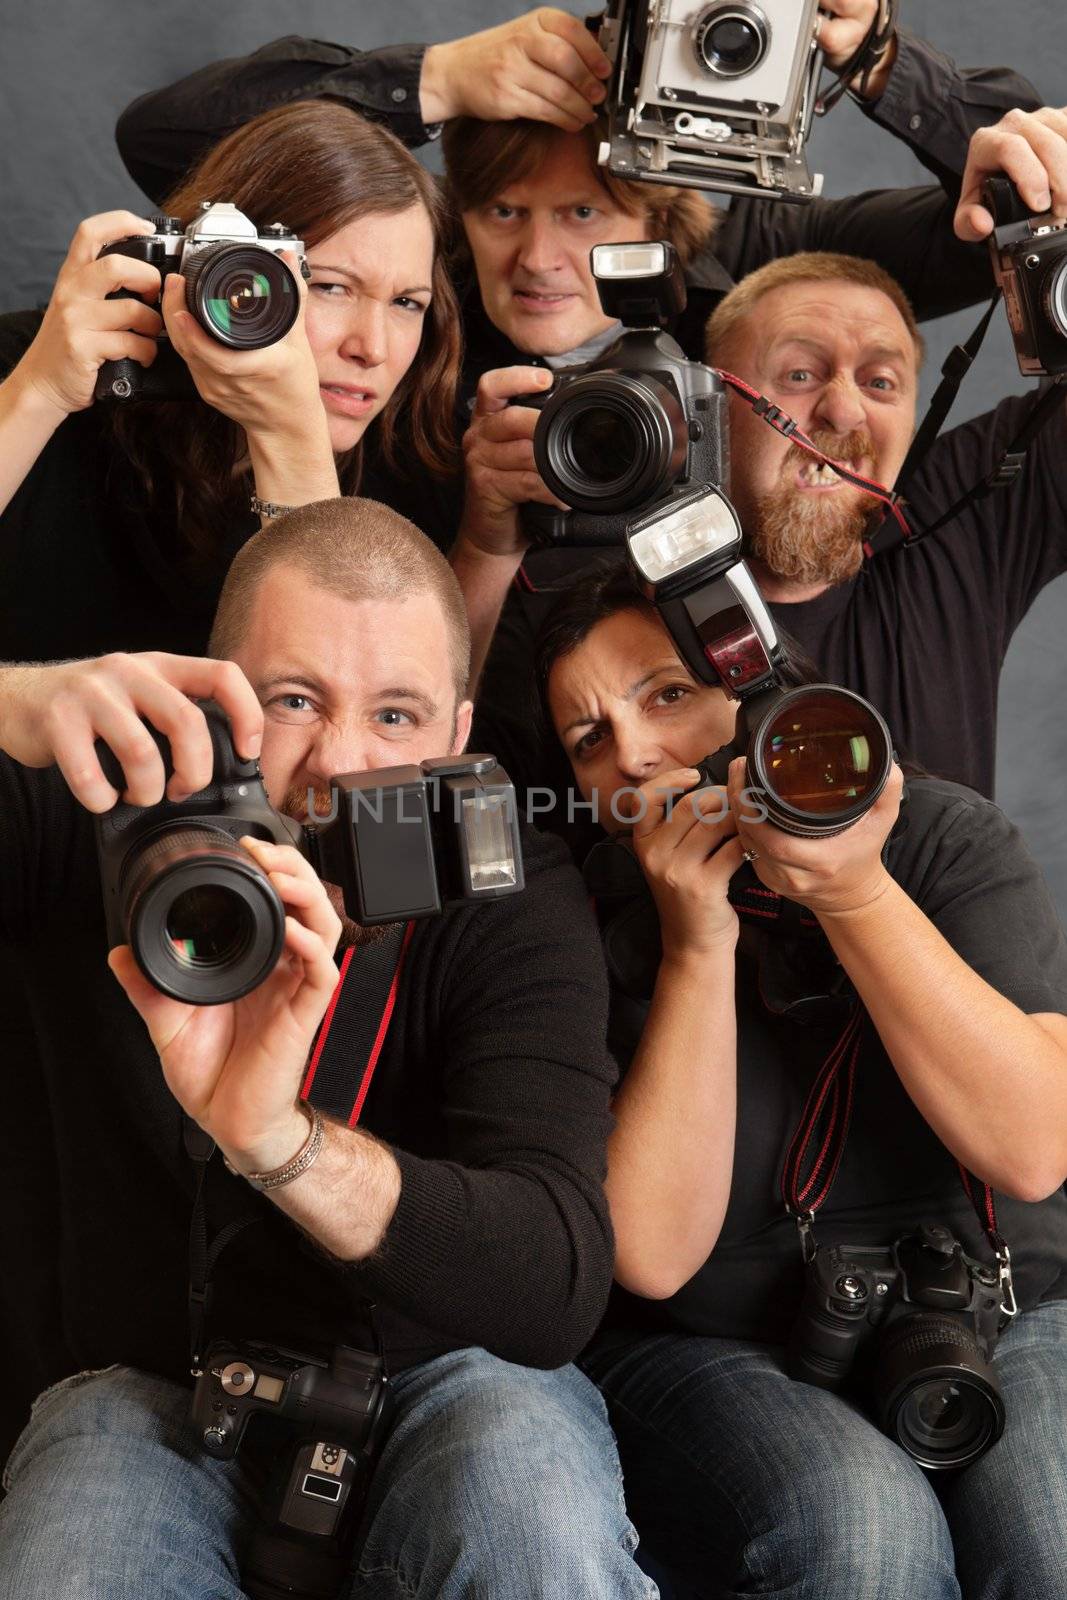 Photo of paparazzi fighting for space to take photos. Focus is on the face of the male in front.